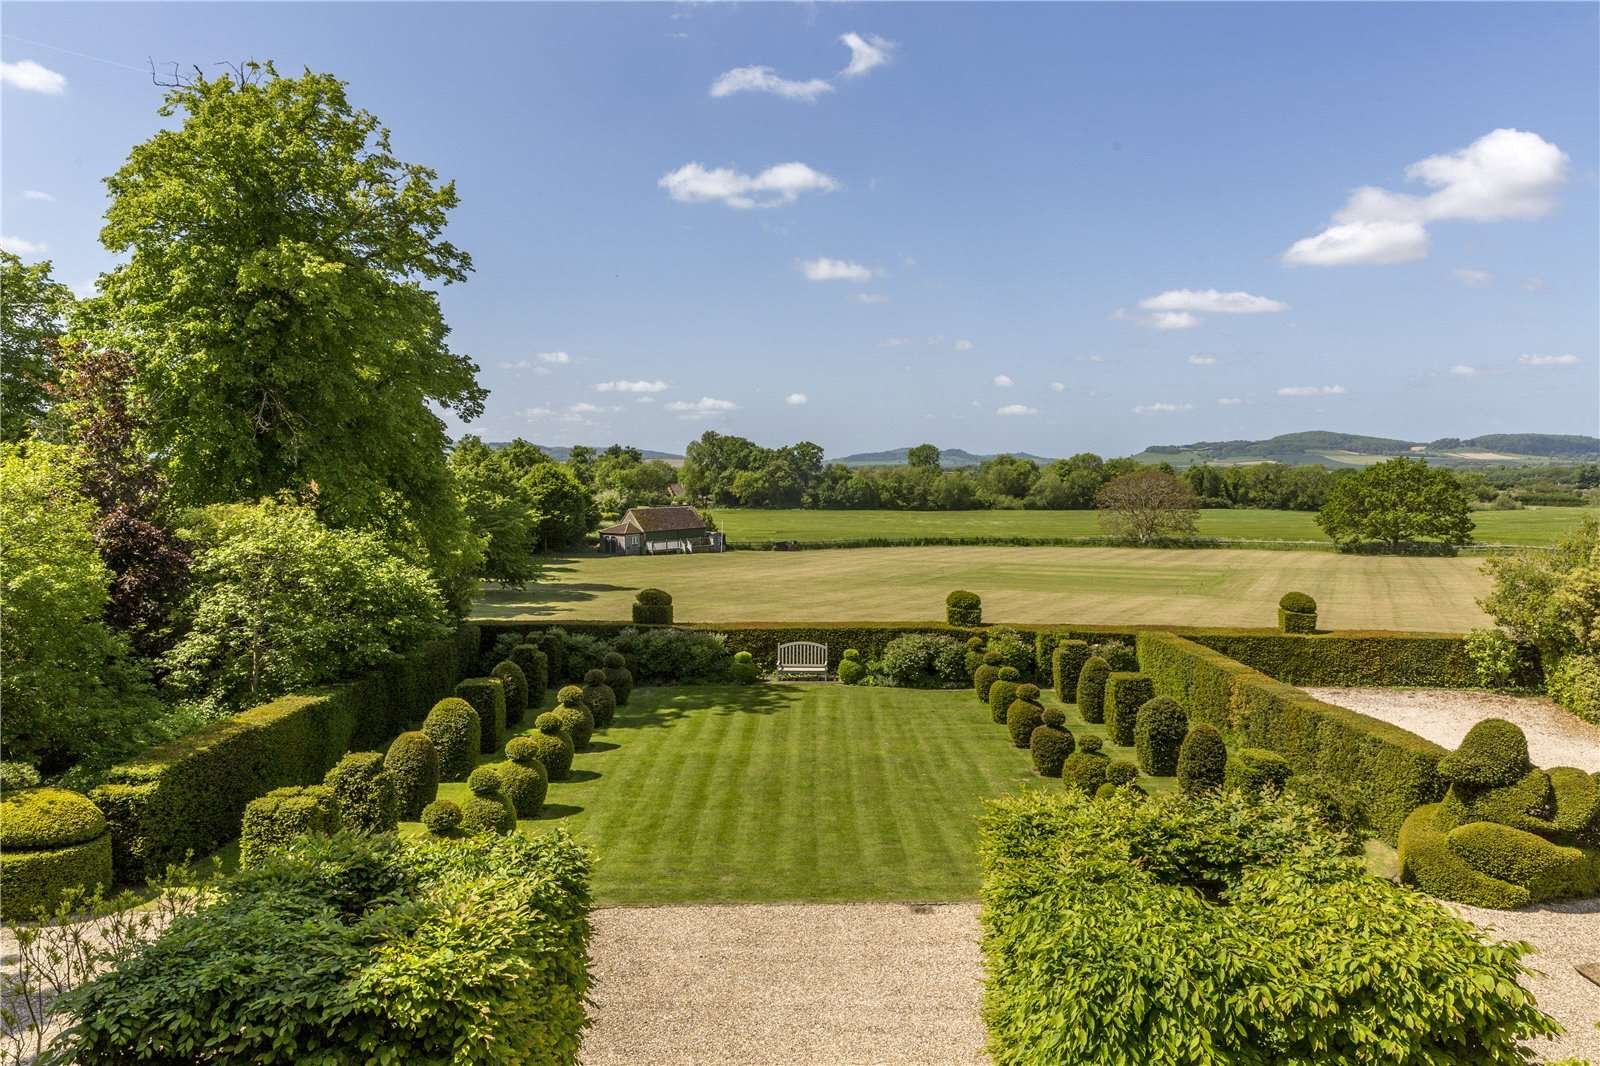 Francis+York+ Historic English Estate in the Cotswolds  00019.jpg